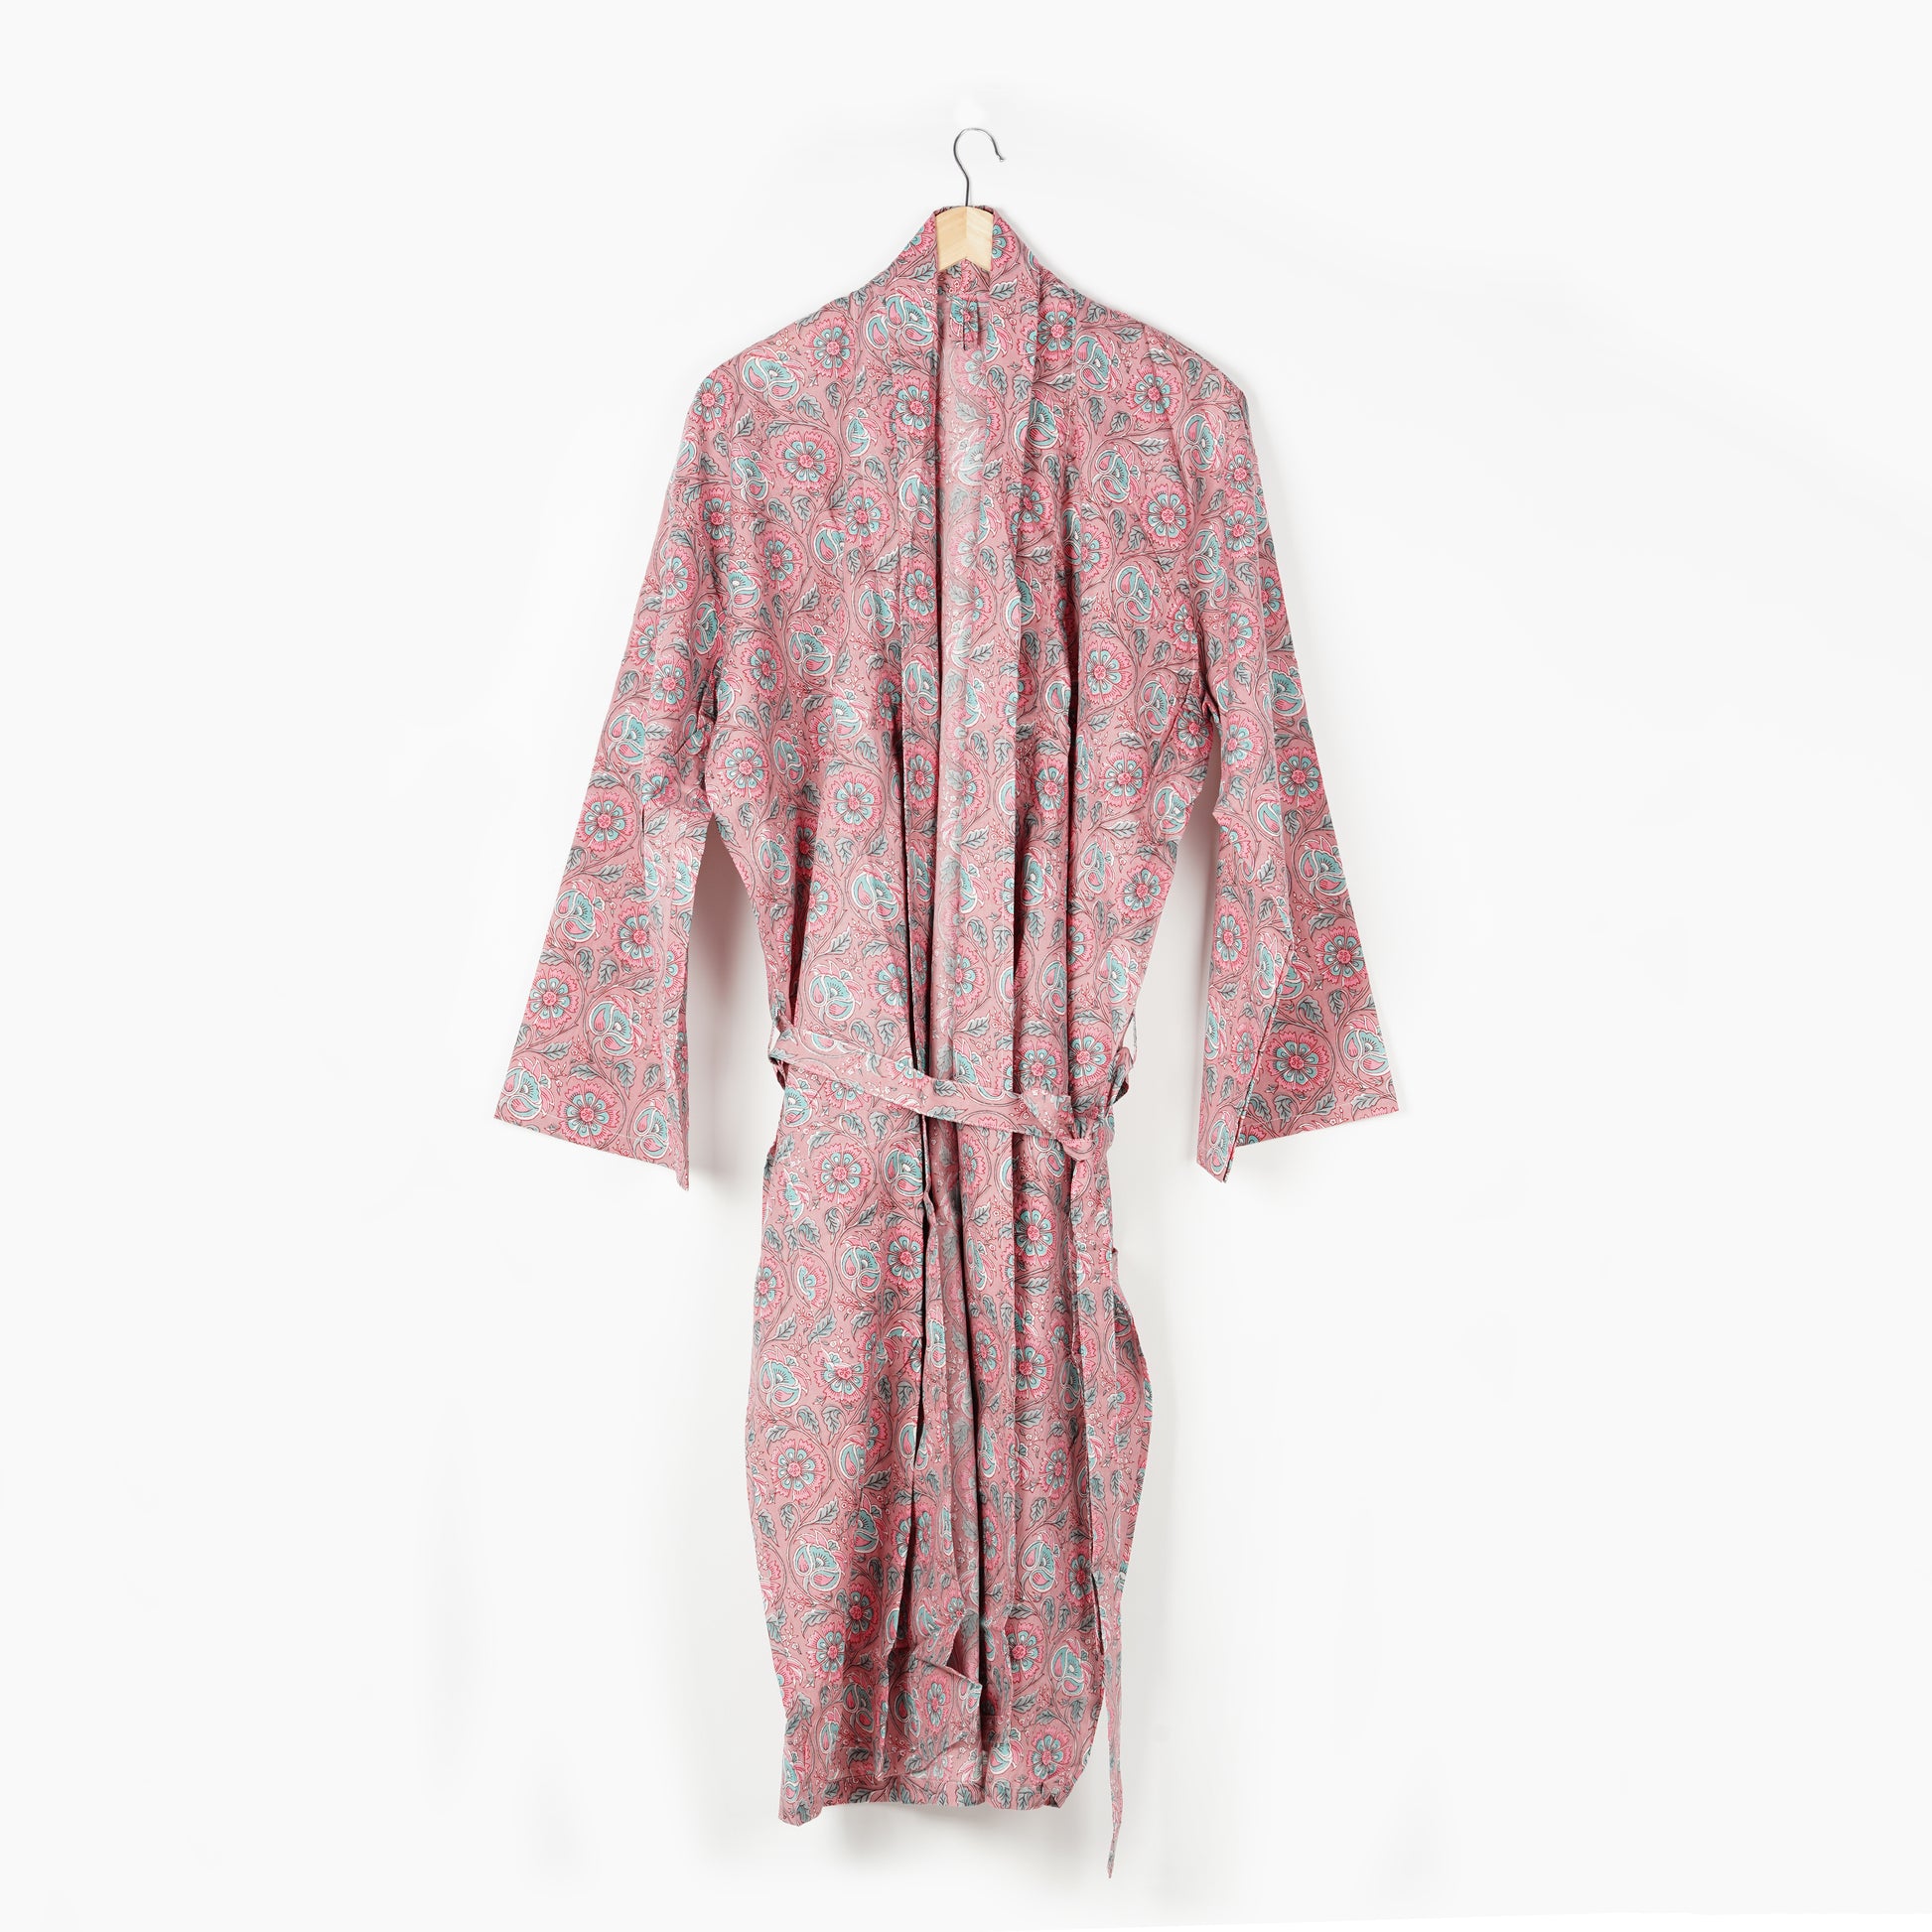 Kimono Bath Robes/ Night Suit -DS18 - The Teal Thread